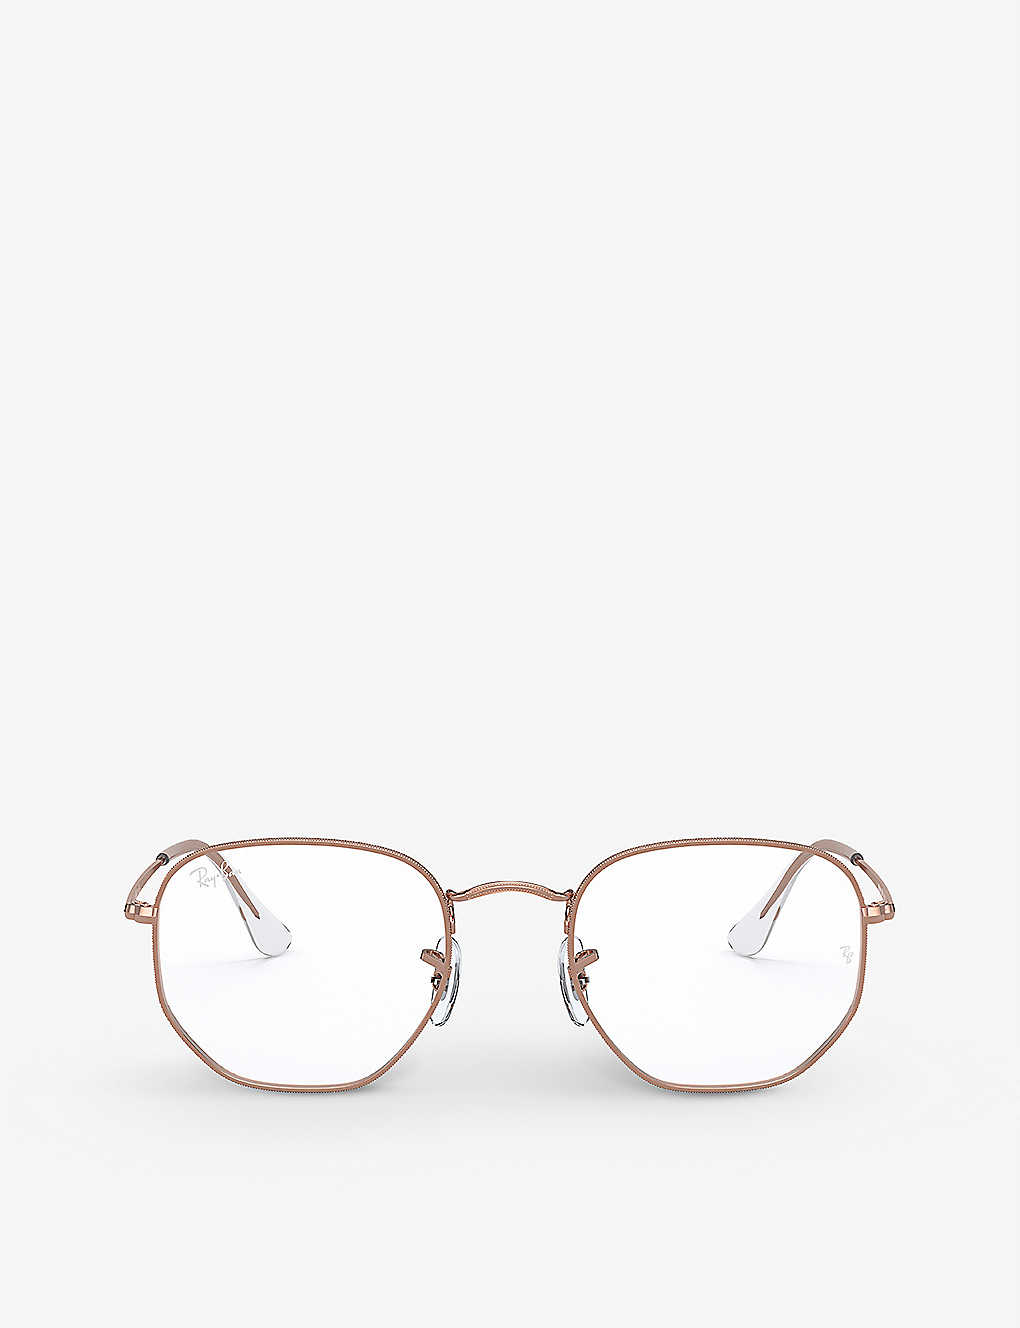 Ray Ban Rx6448 Metal Hexagonal-frame Glasses In Gold